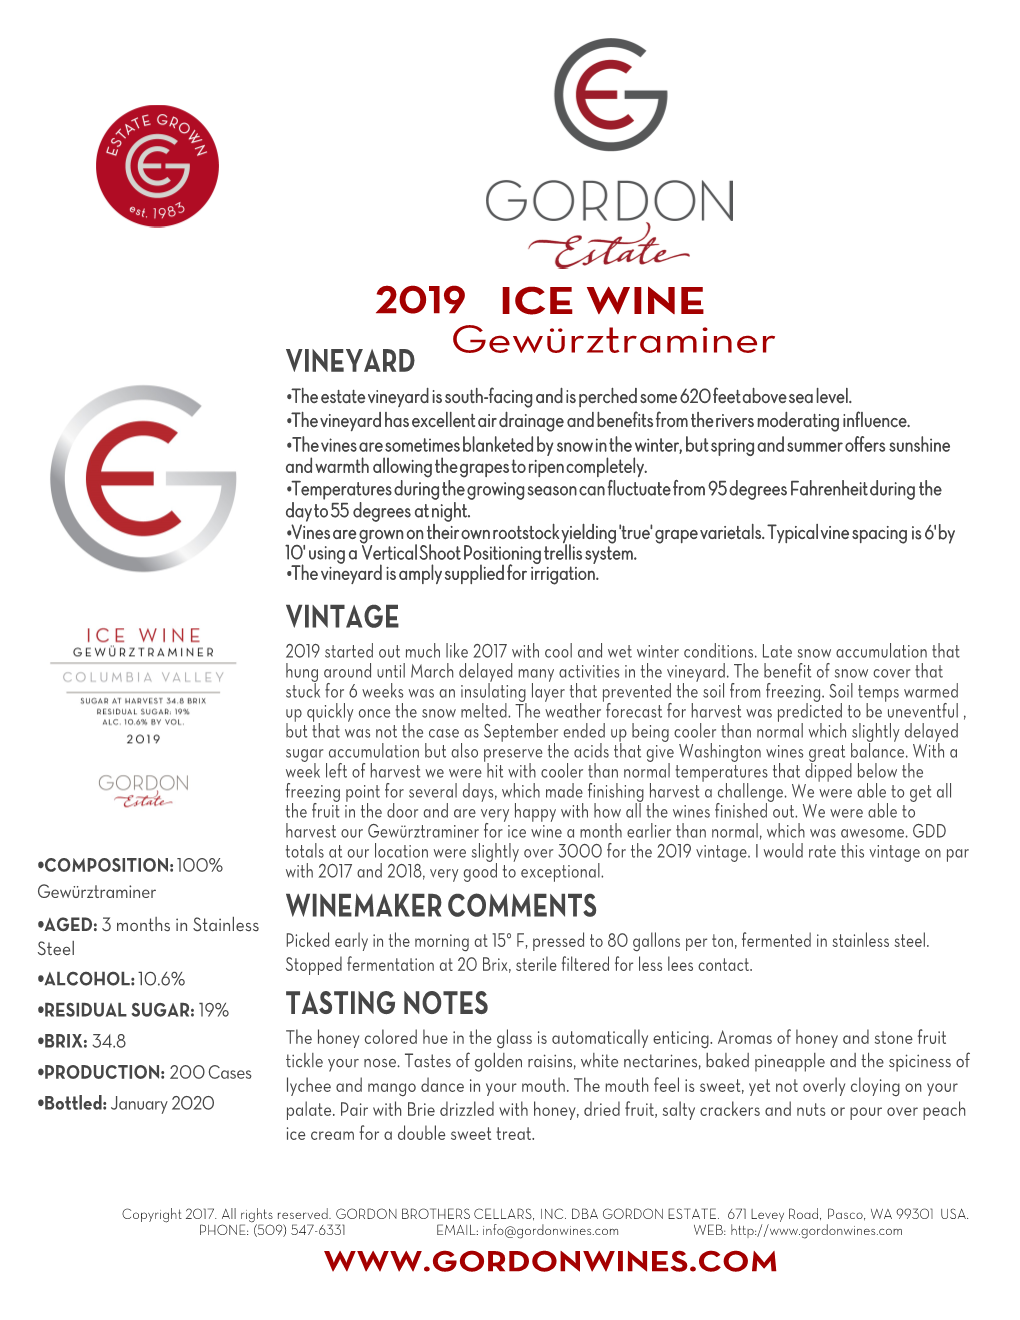 2019 ICE WINE Gewürztraminer VINEYARD •The Estate Vineyard Is South-Facing and Is Perched Some 620 Feet Above Sea Level